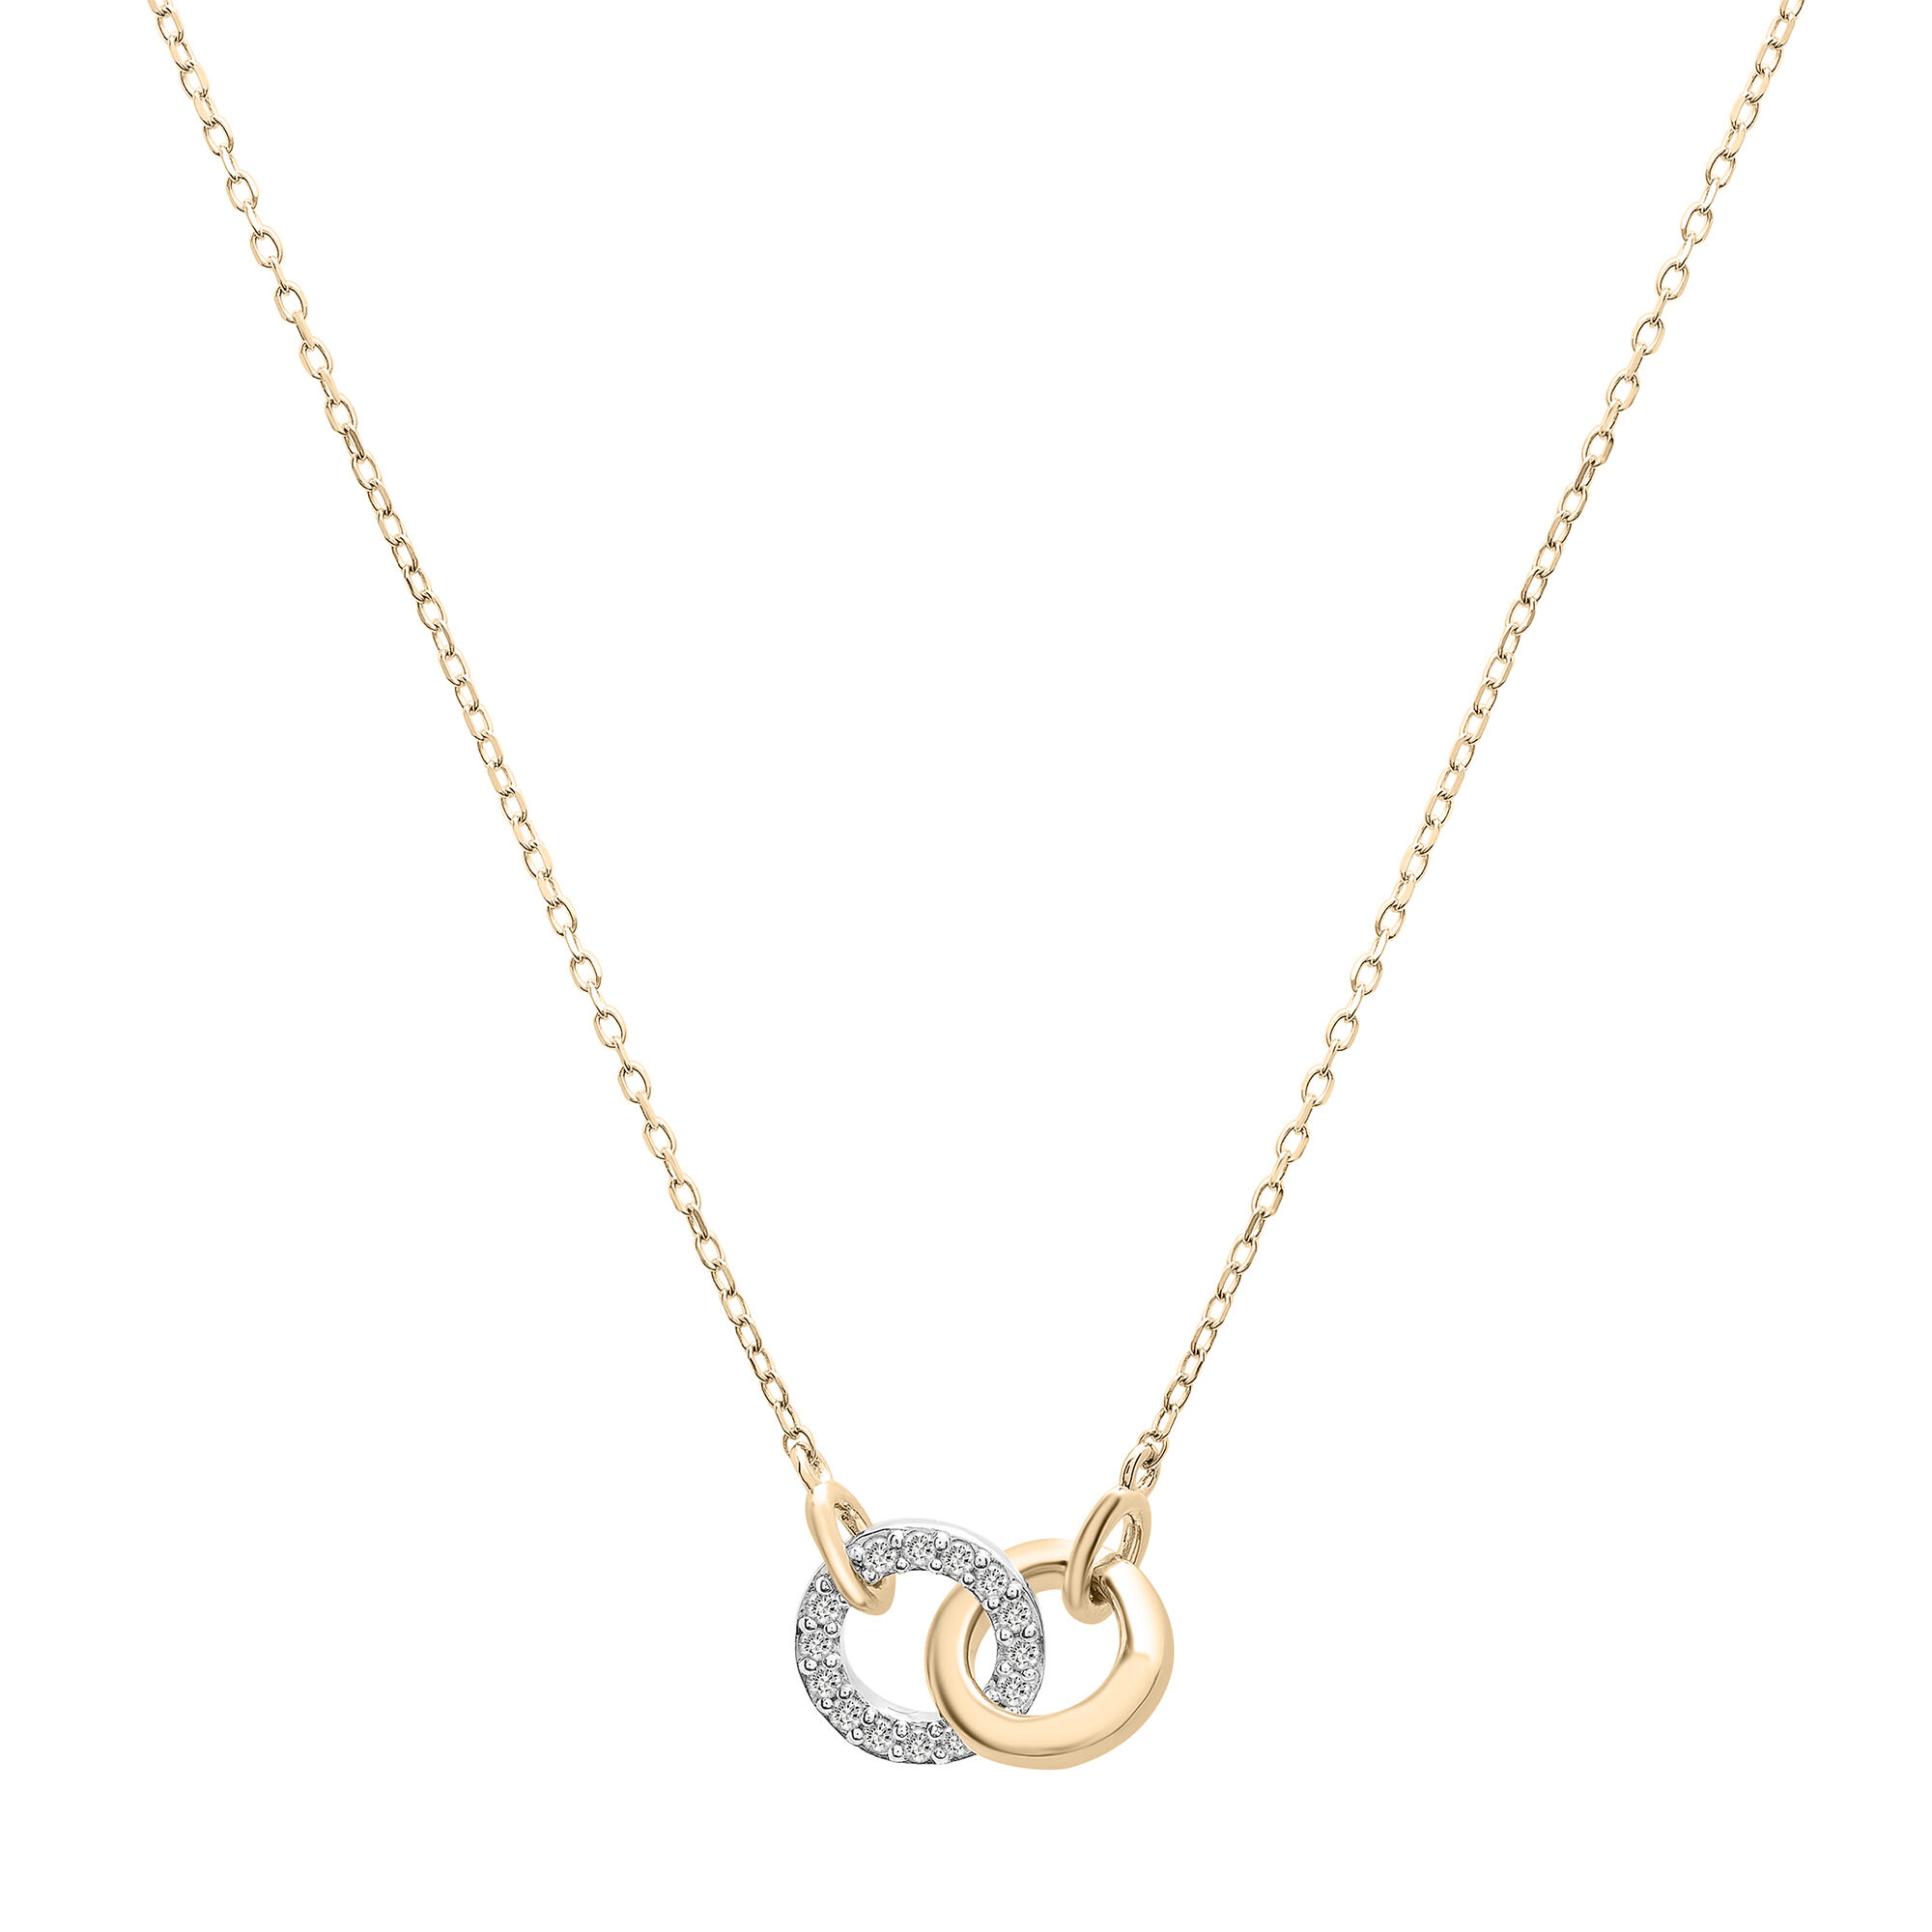 Sterling silver linked circle pendant necklace